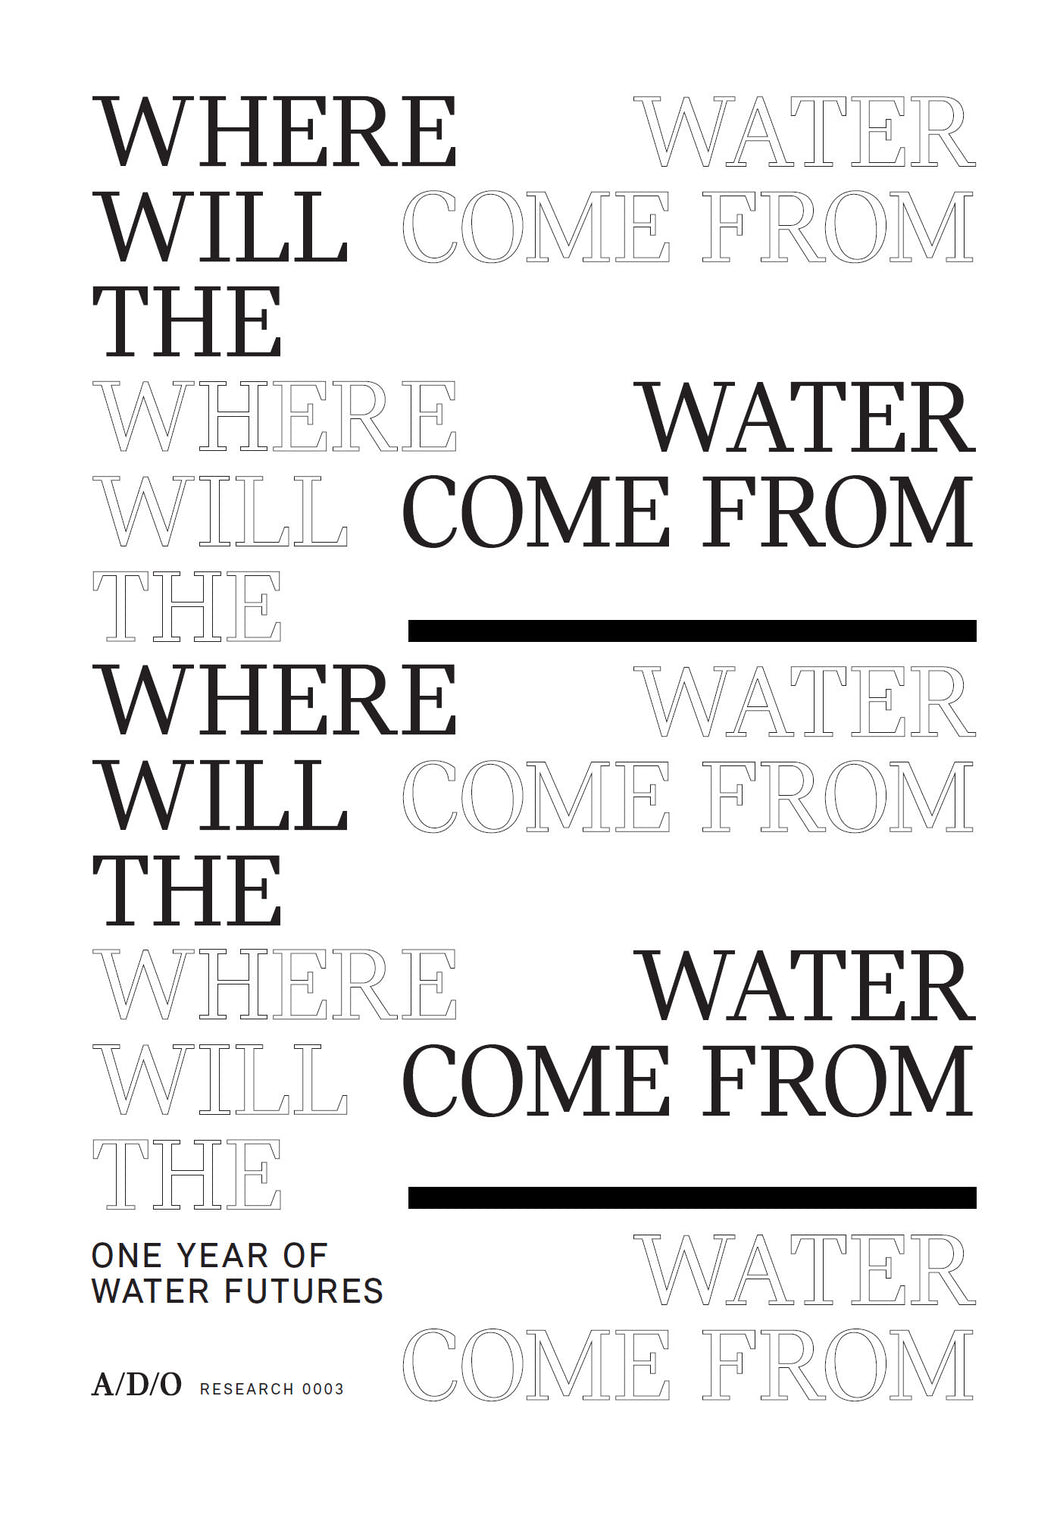 Where Will the Water Come From? One Year of Water Futures